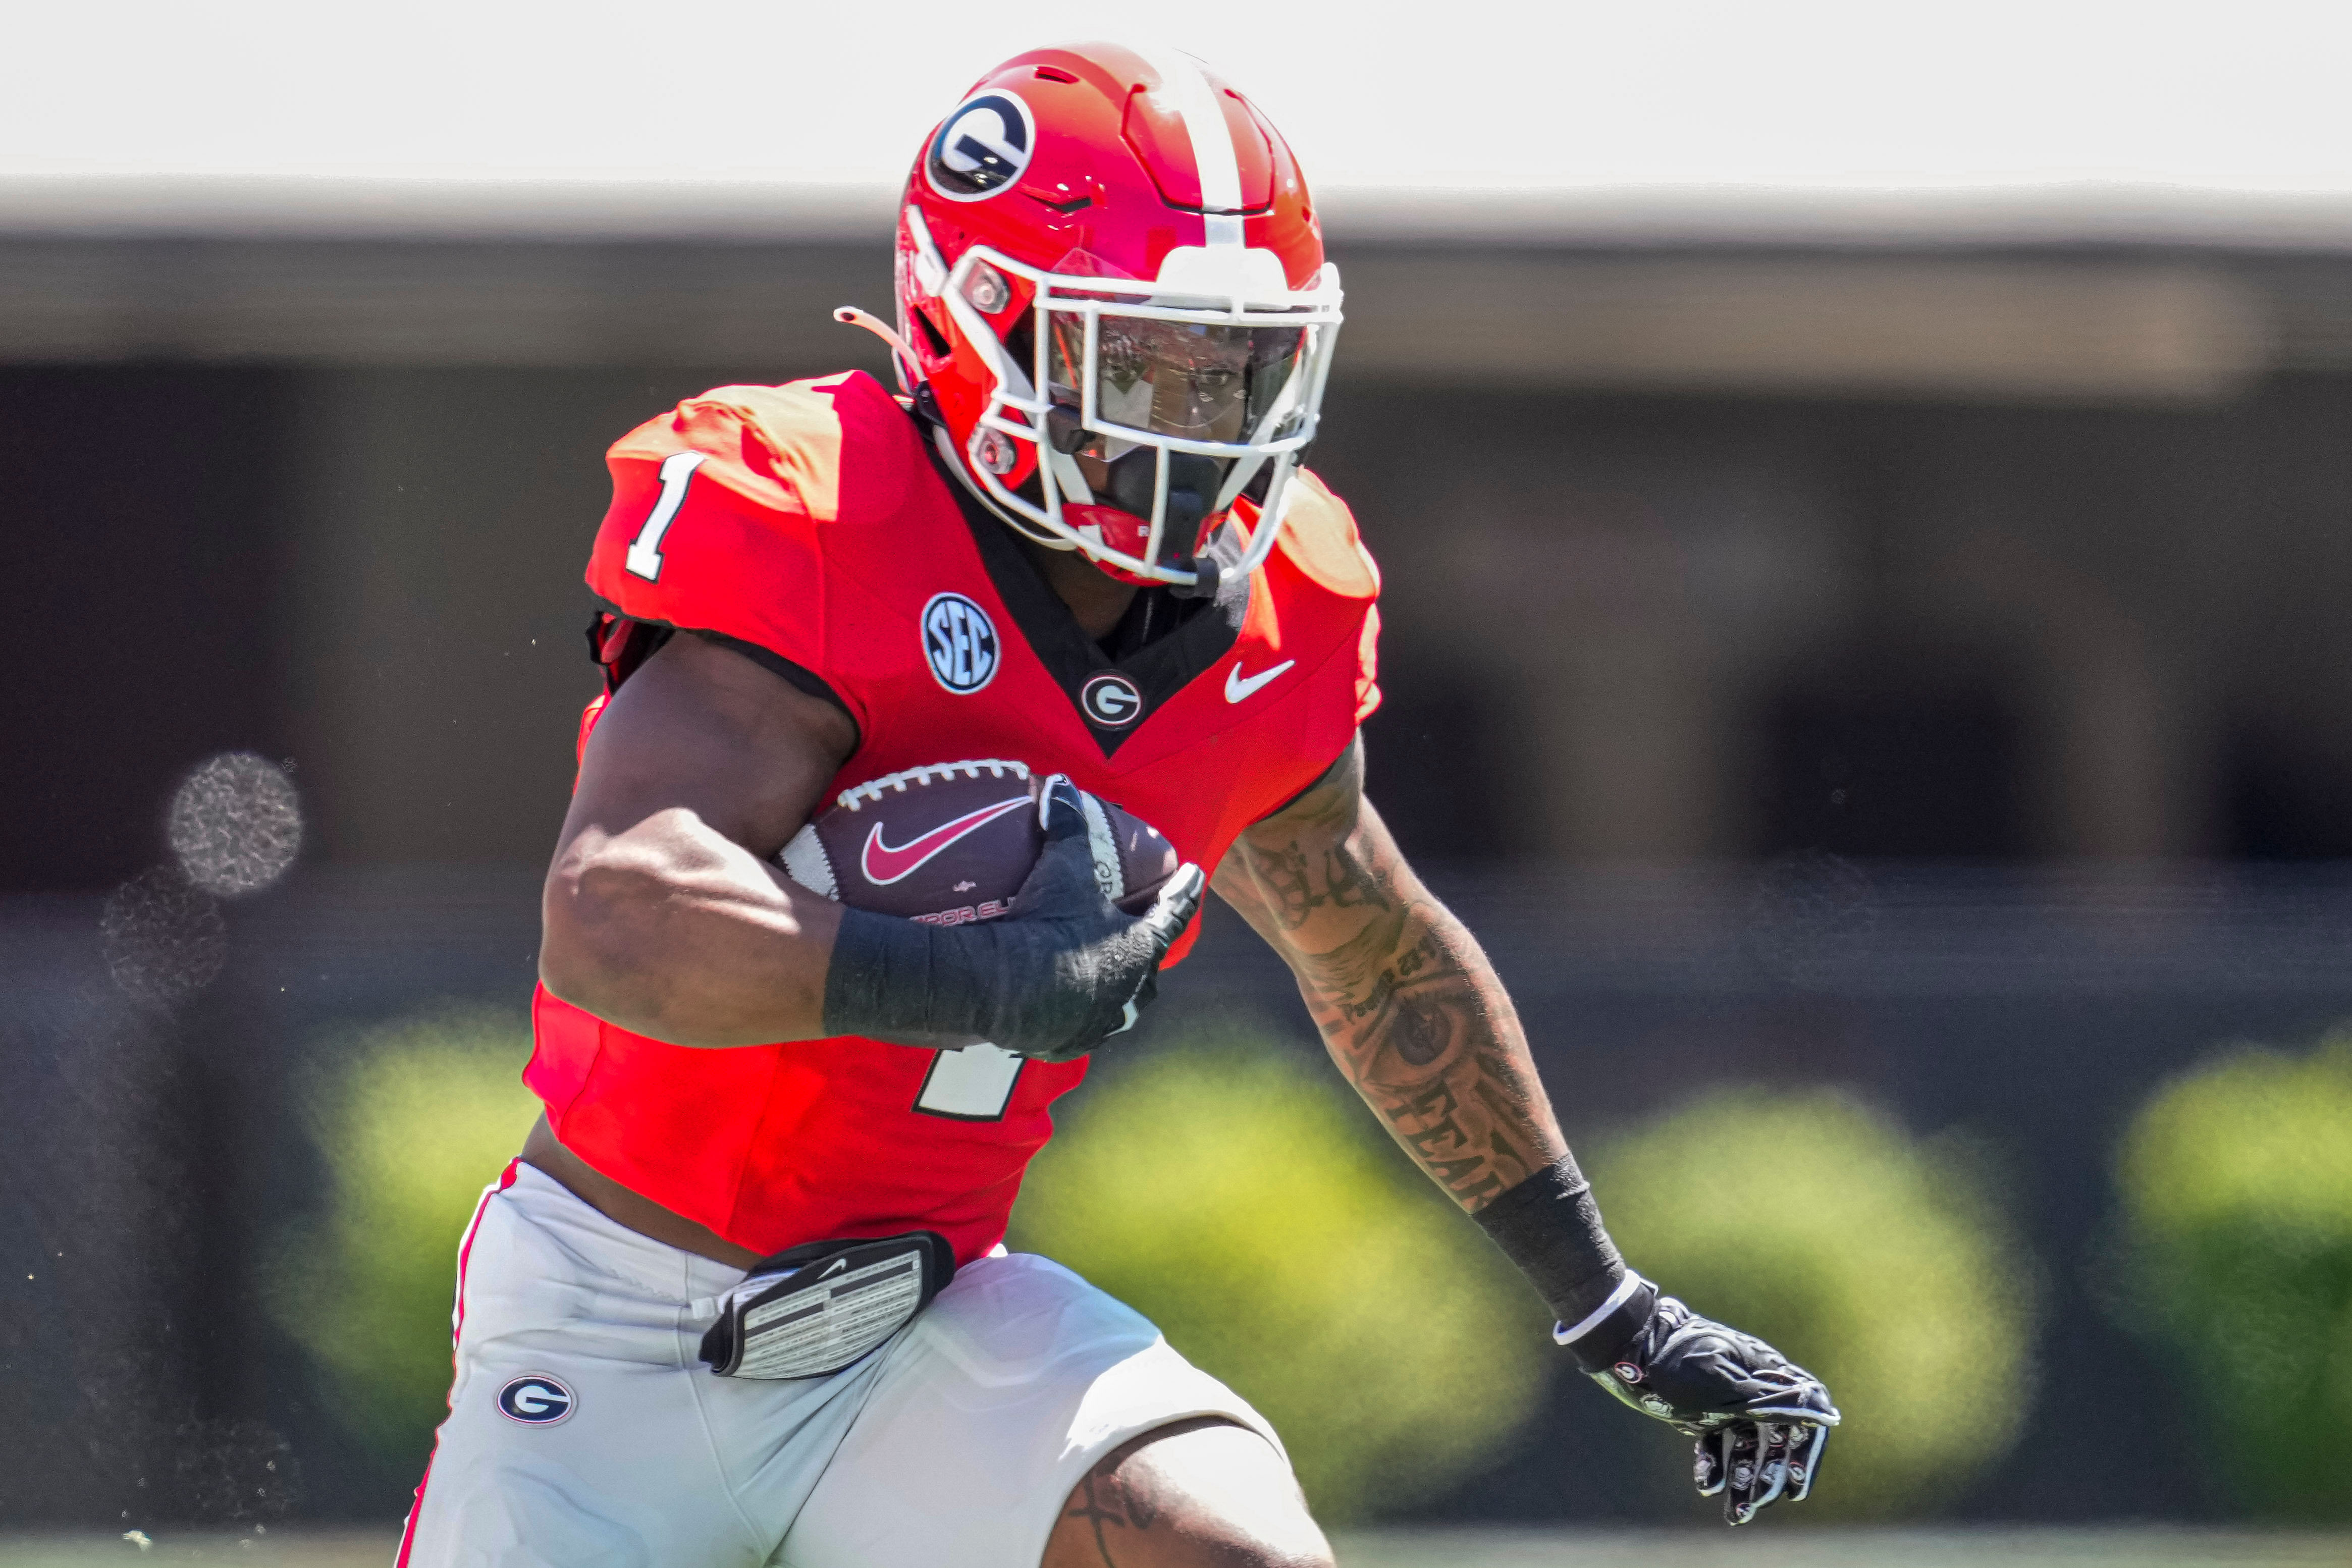 Former Florida Gator Trevor Etienne could have a massive season in his new home at Georgia.